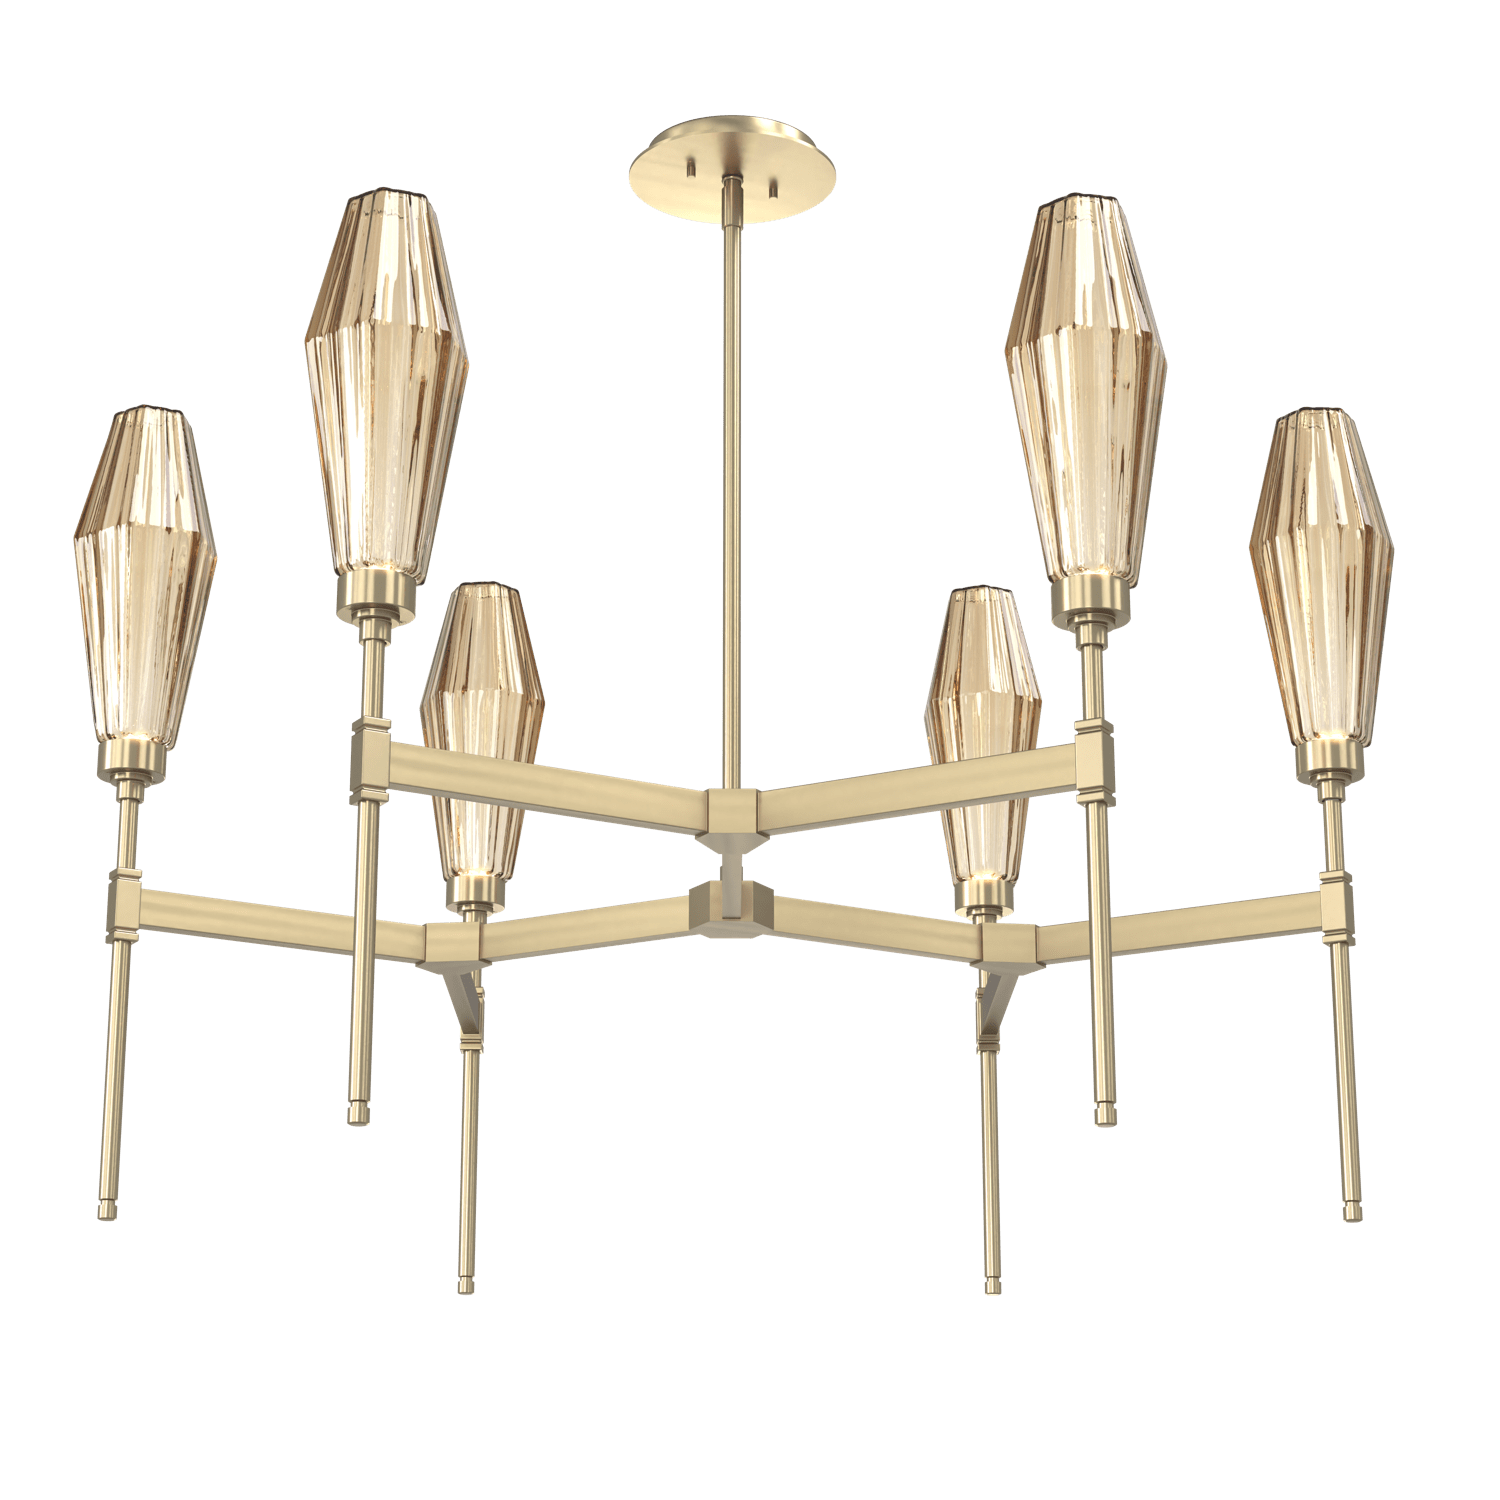 CHB0049-37-HB-RB-Hammerton-Studio-Aalto-37-inch-round-belvedere-chandelier-with-heritage-brass-finish-and-optic-ribbed-bronze-glass-shades-and-LED-lamping